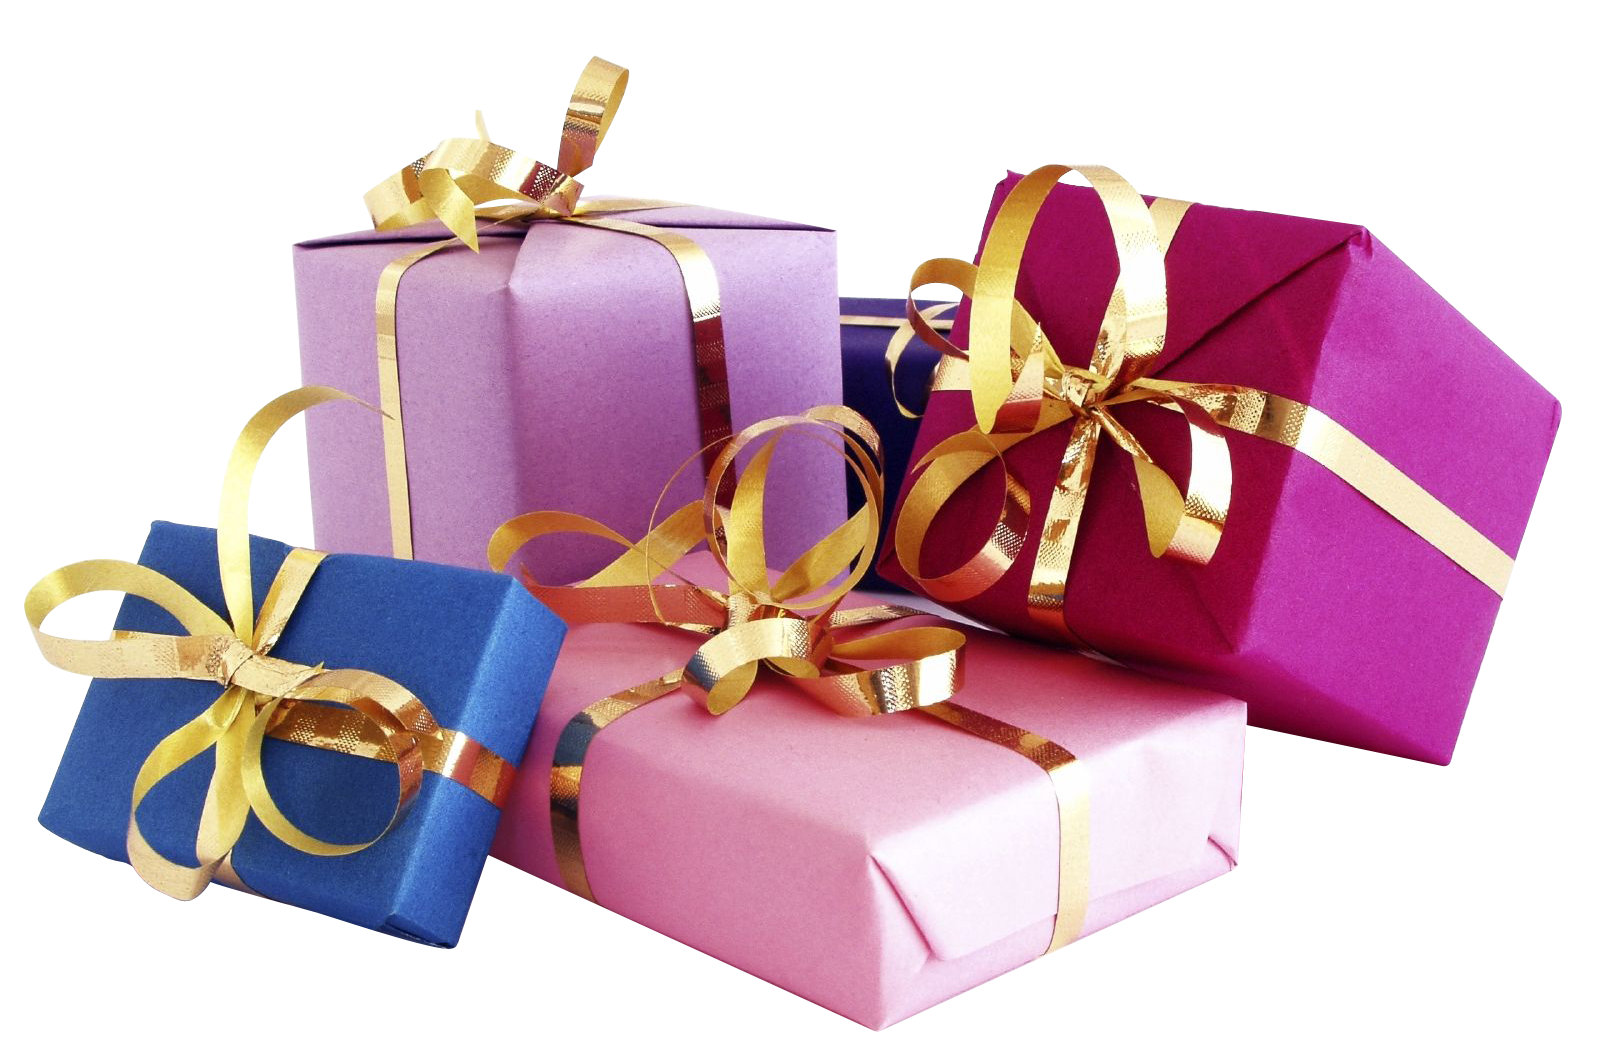 Giving and selecting a purposeful gift